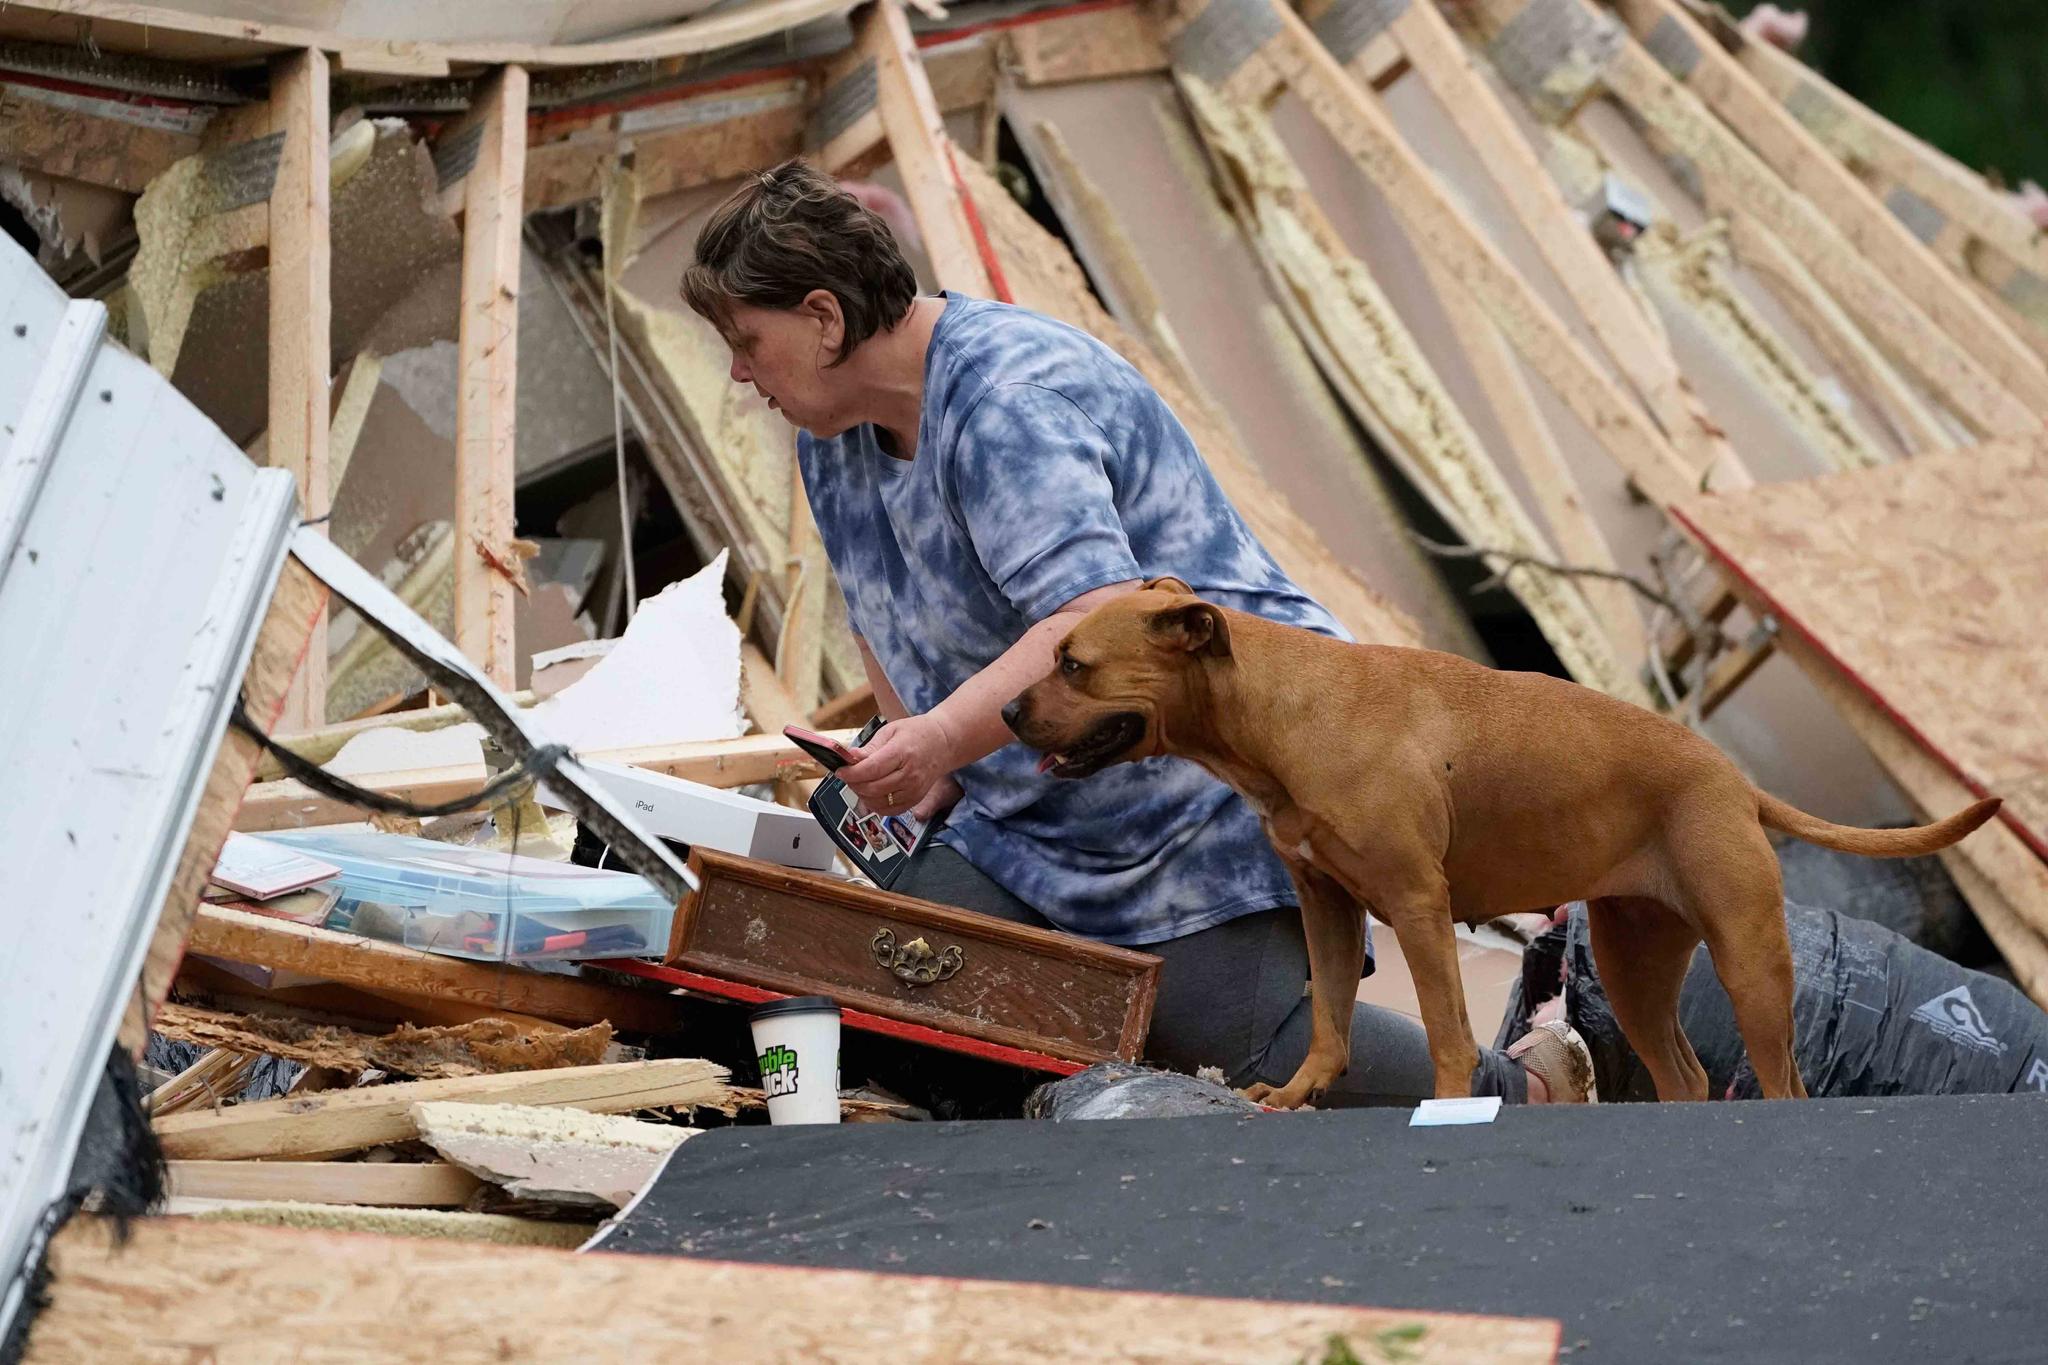 Vickie Savell looks through her belongings amid the remains of her new mobile home early Monday, May 3, 2021, in Yazoo County, Miss.